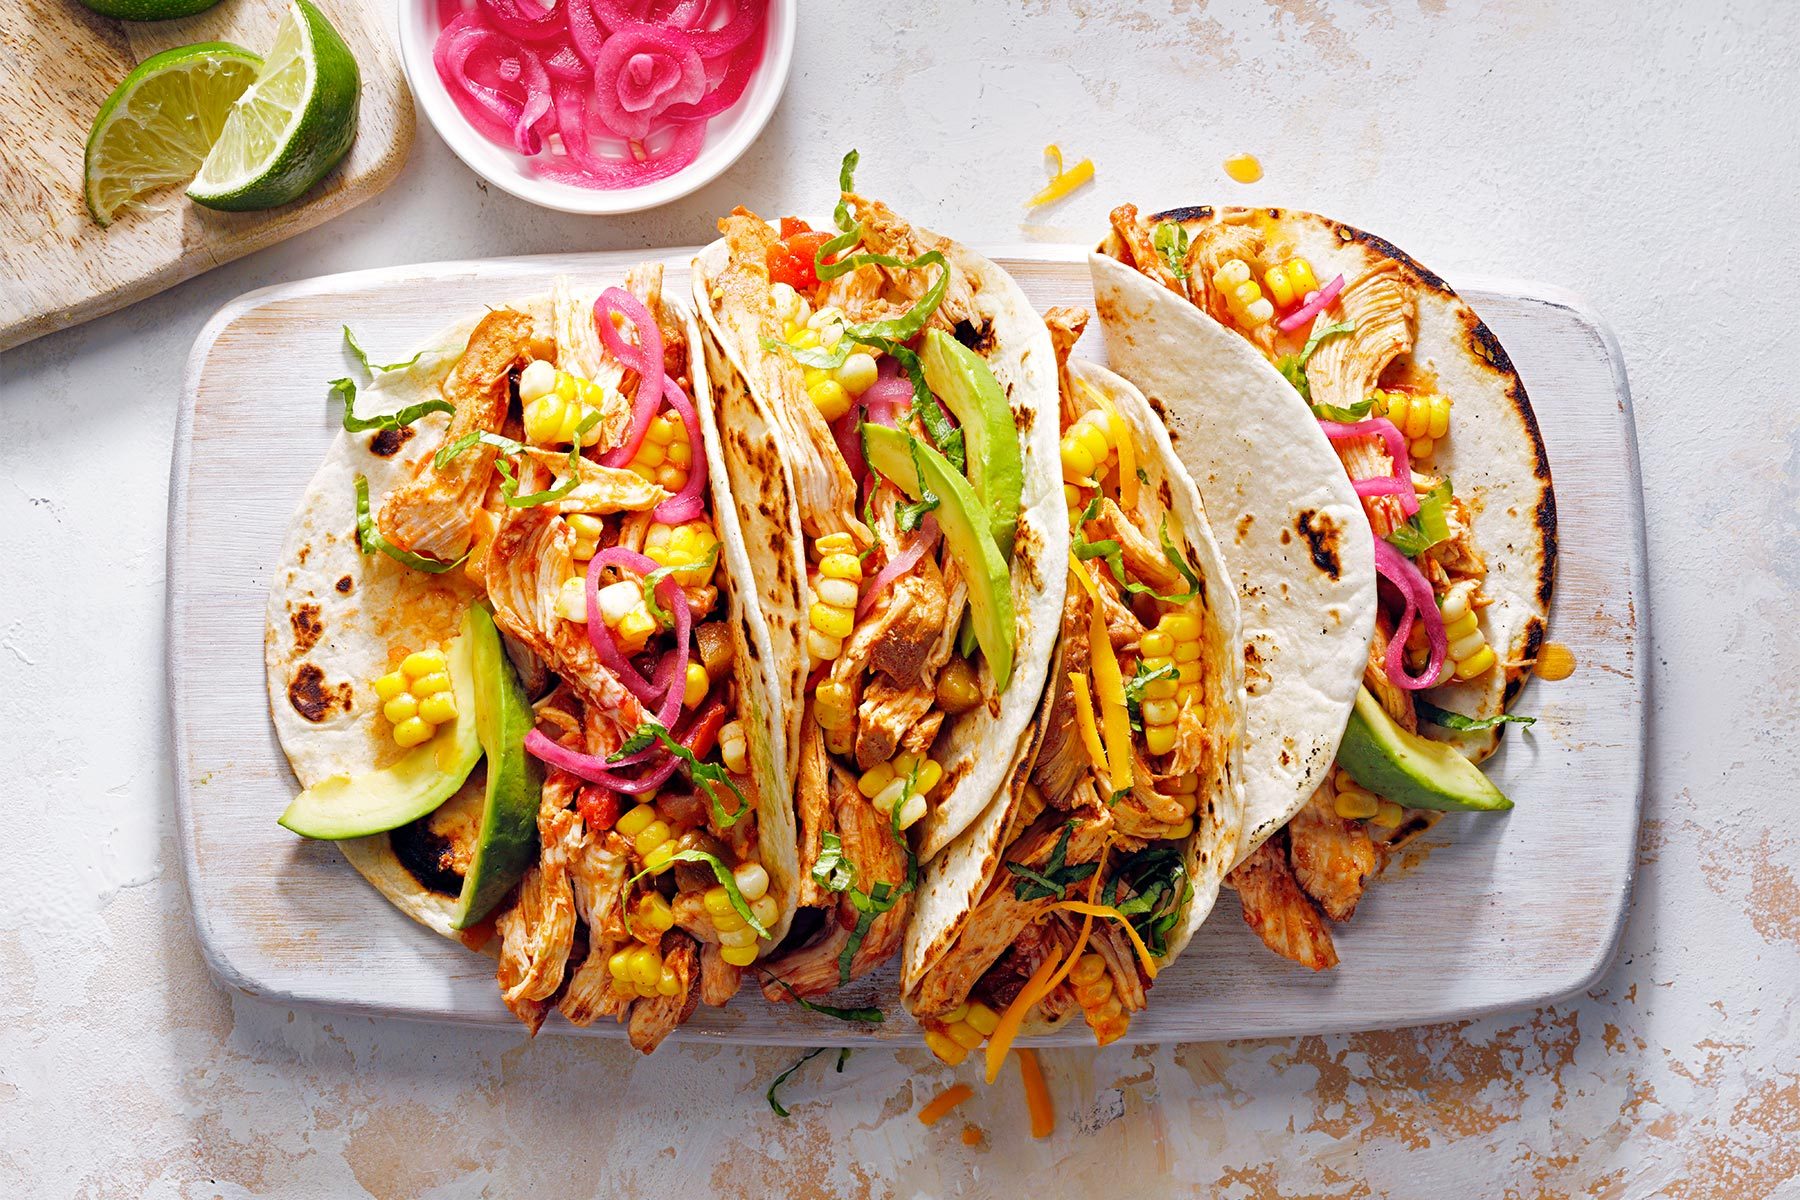 Slow Cooker Chicken Tacos served on plate; bowl of onion and lemon wedges